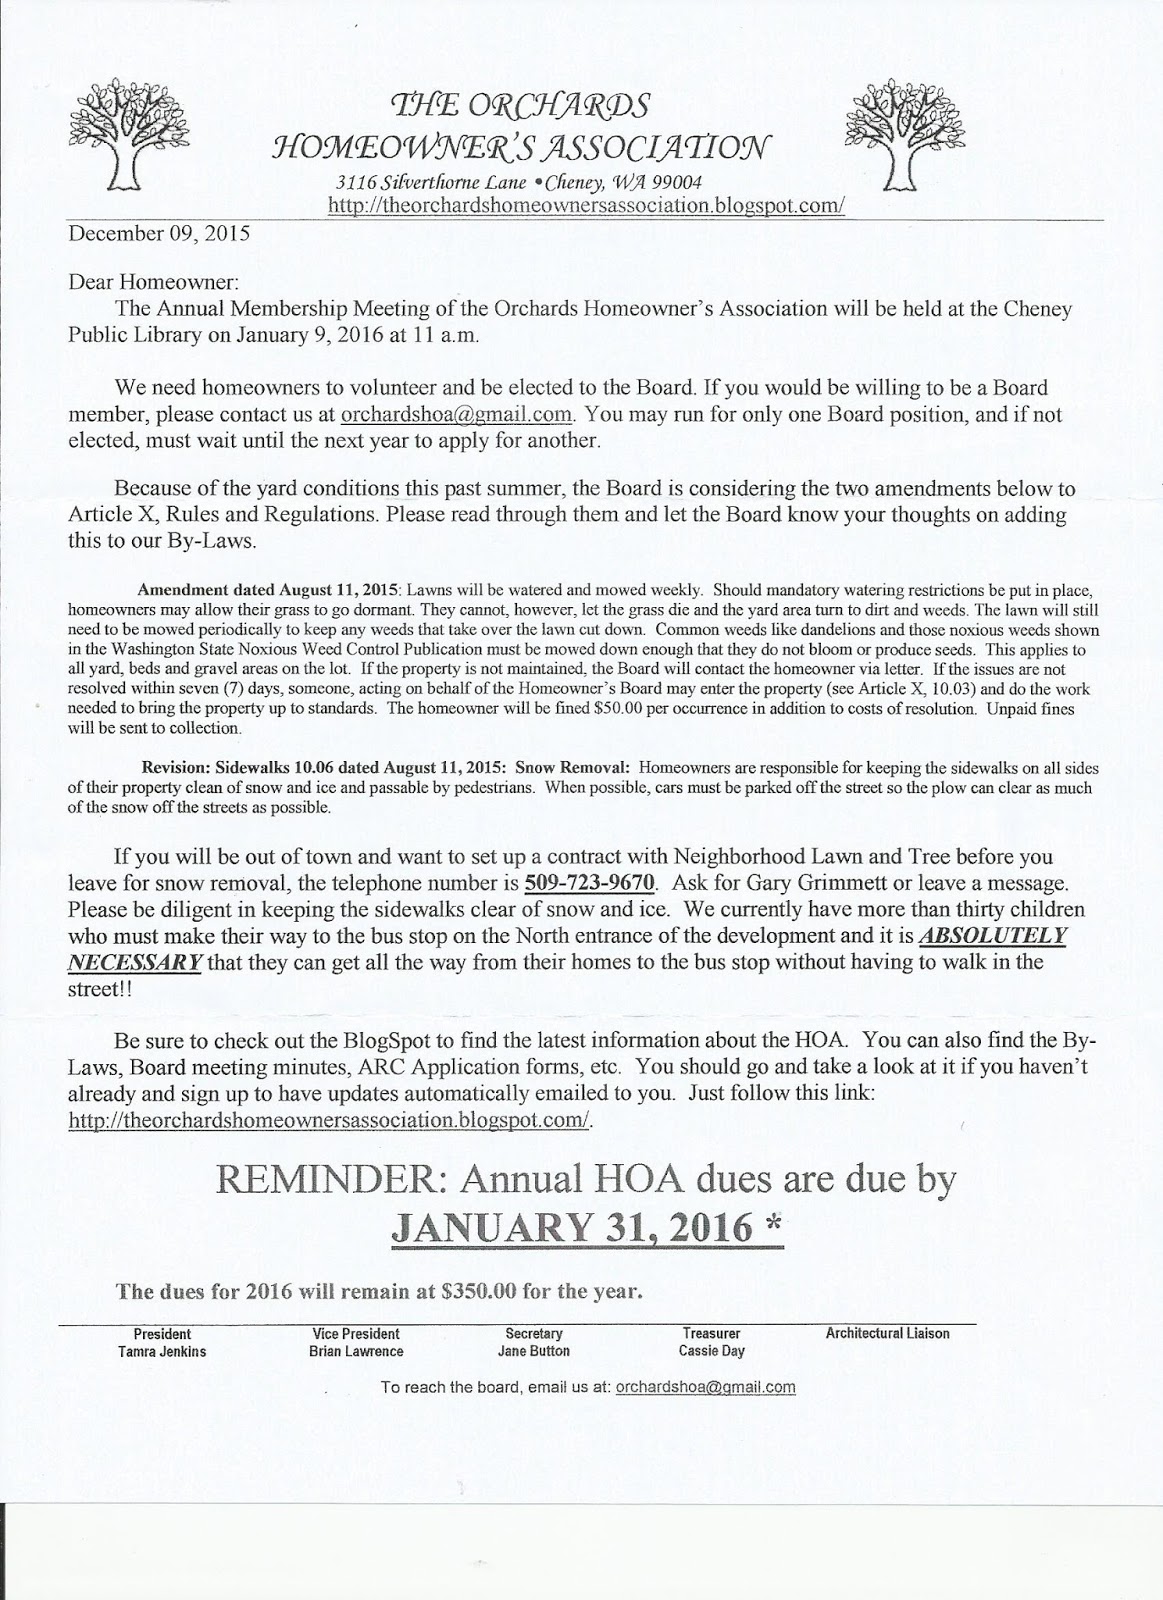 the-orchards-homeowner-s-association-cheney-wa-annual-meeting-notice